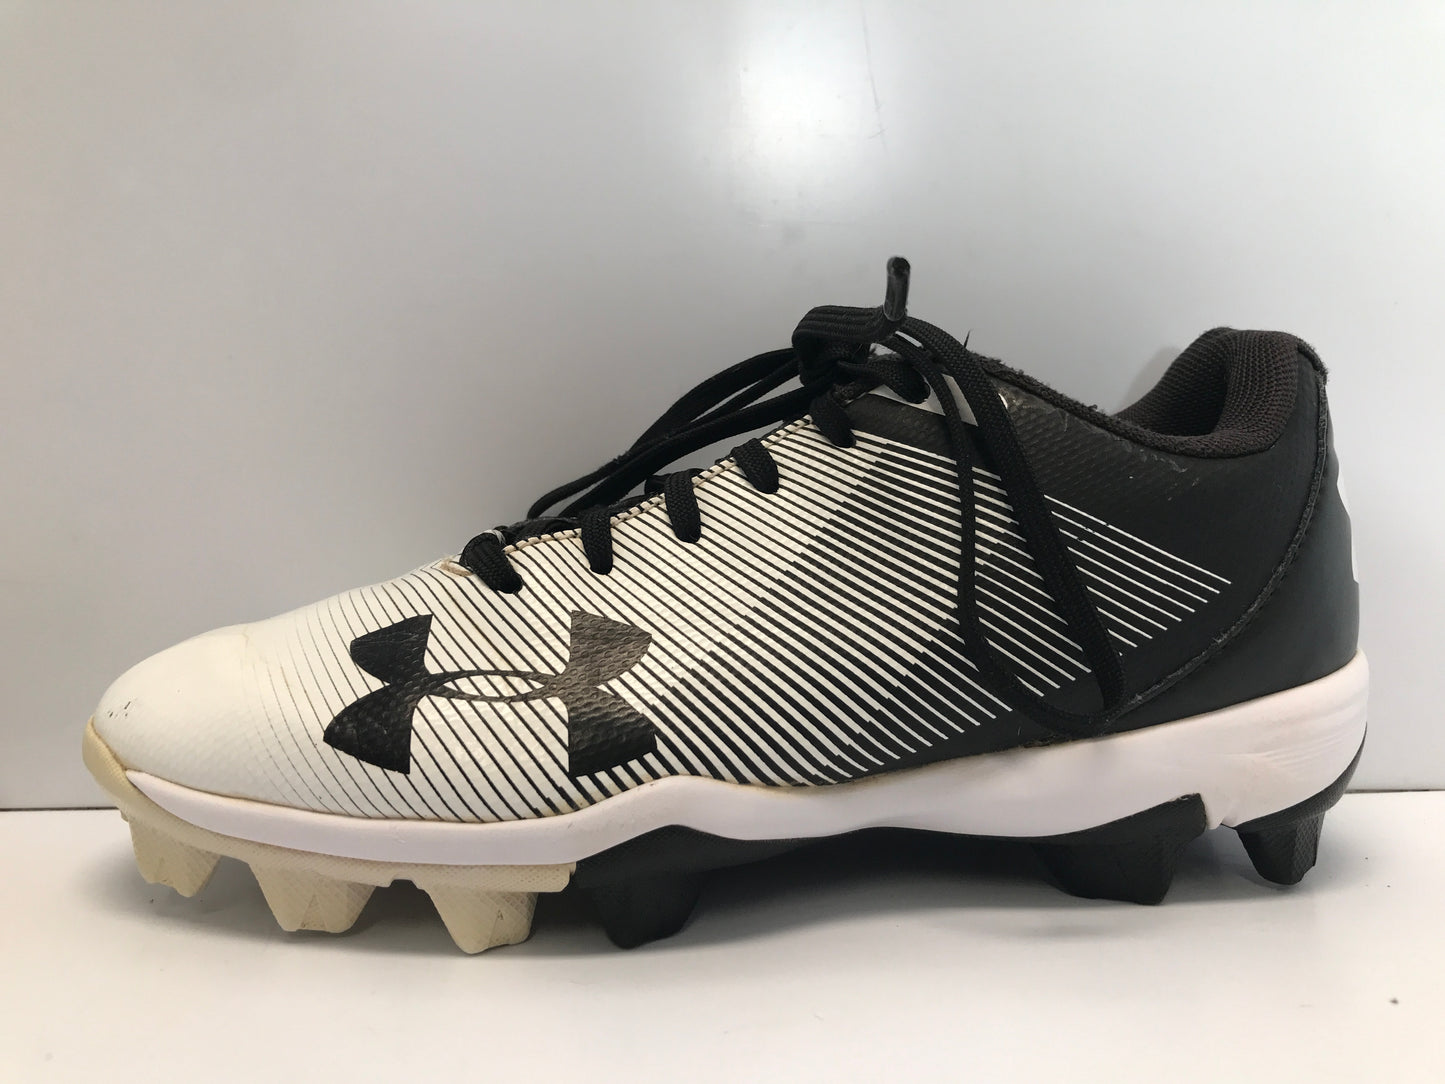 Baseball Shoes Cleats Child Size 2 Under Armour Black White Excellent